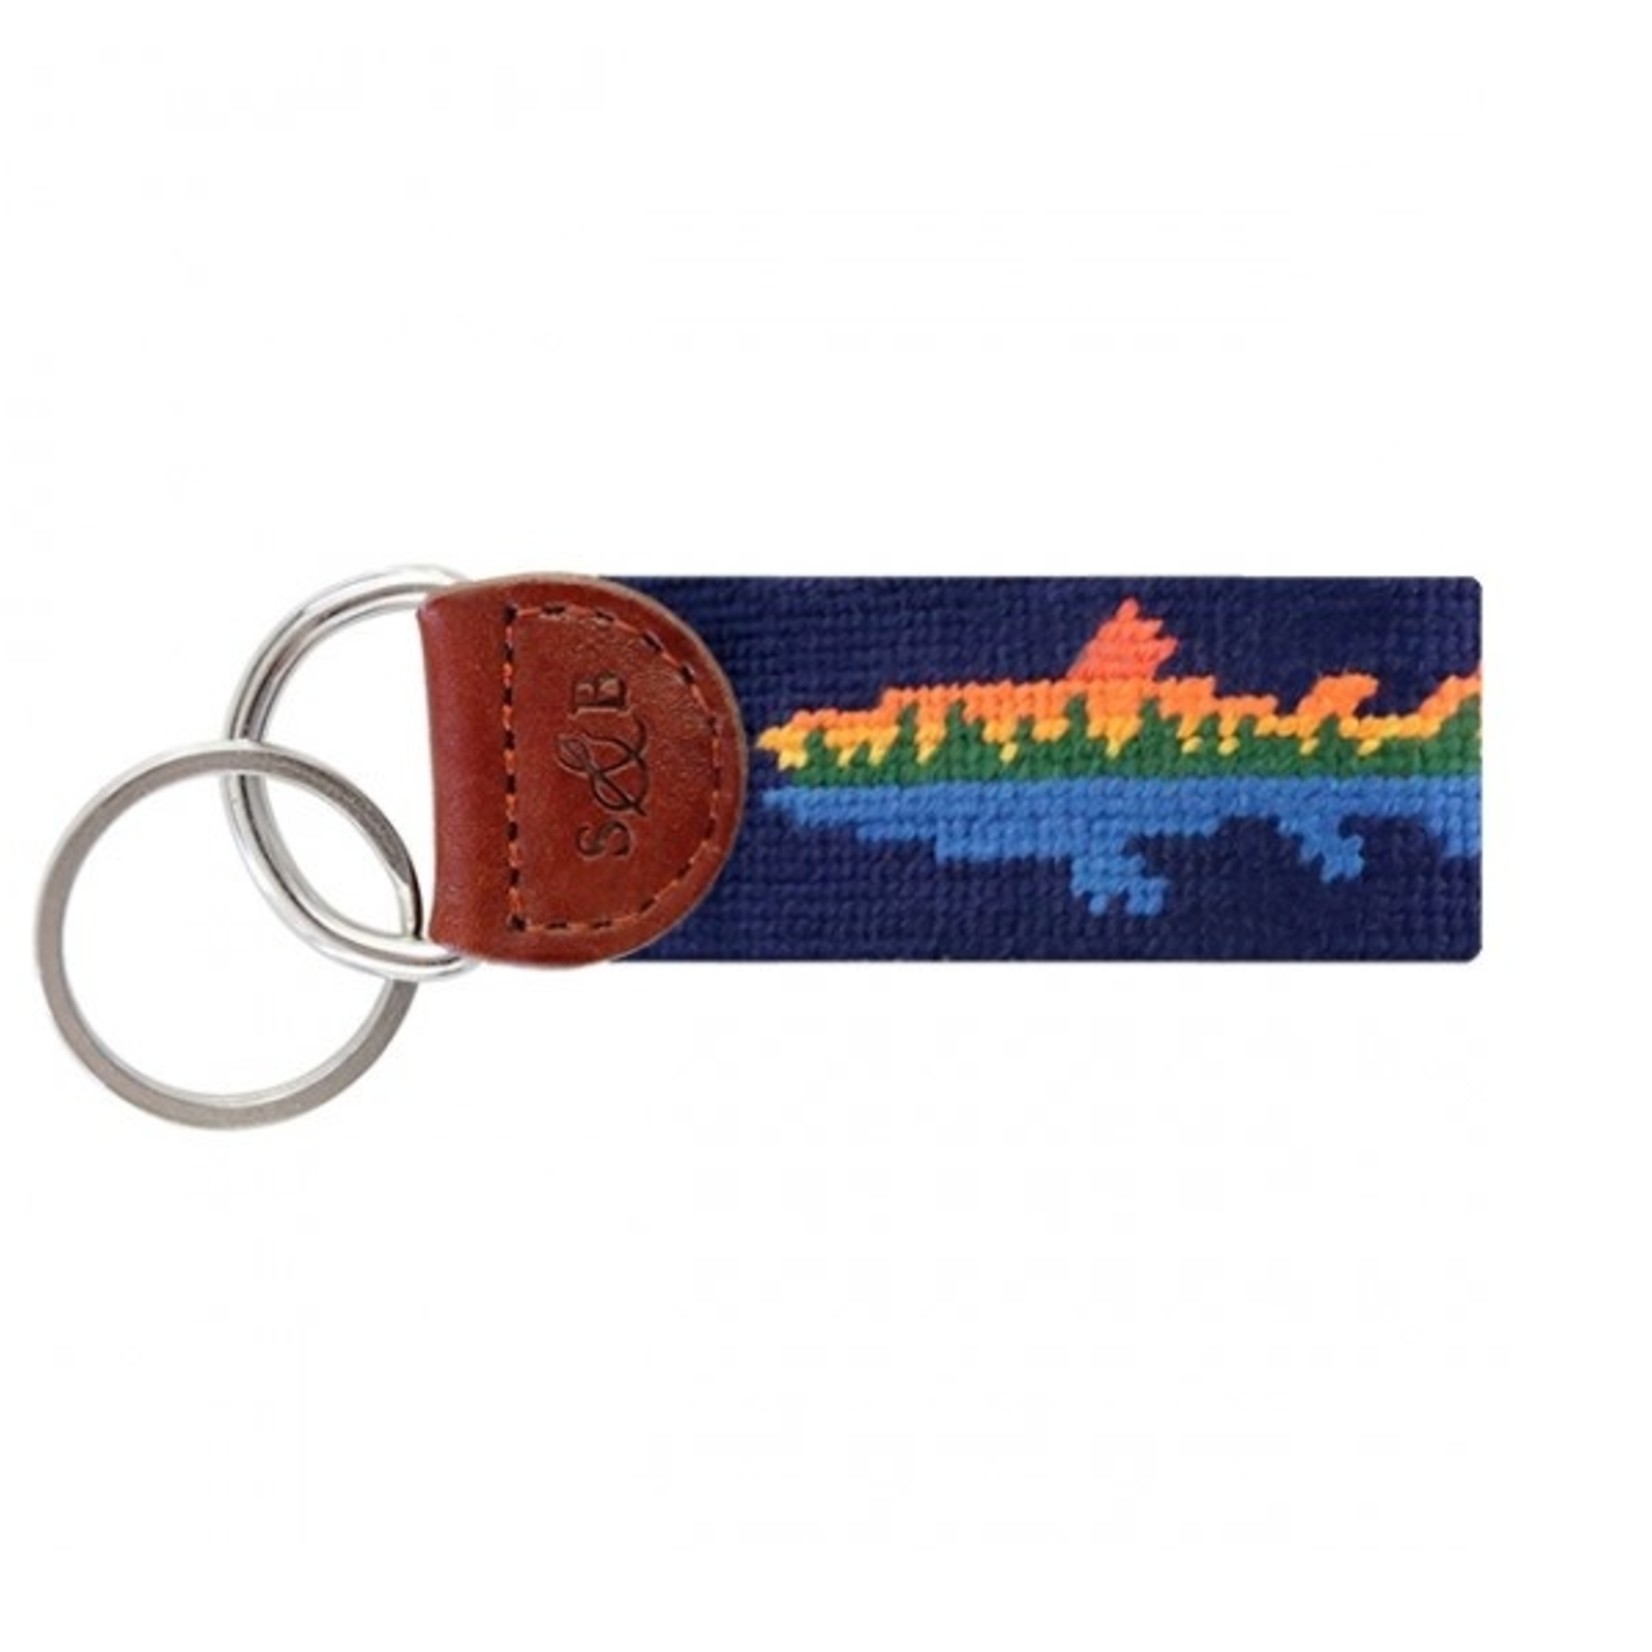 Smathers & Branson Smathers and Branson Trout Key Fob